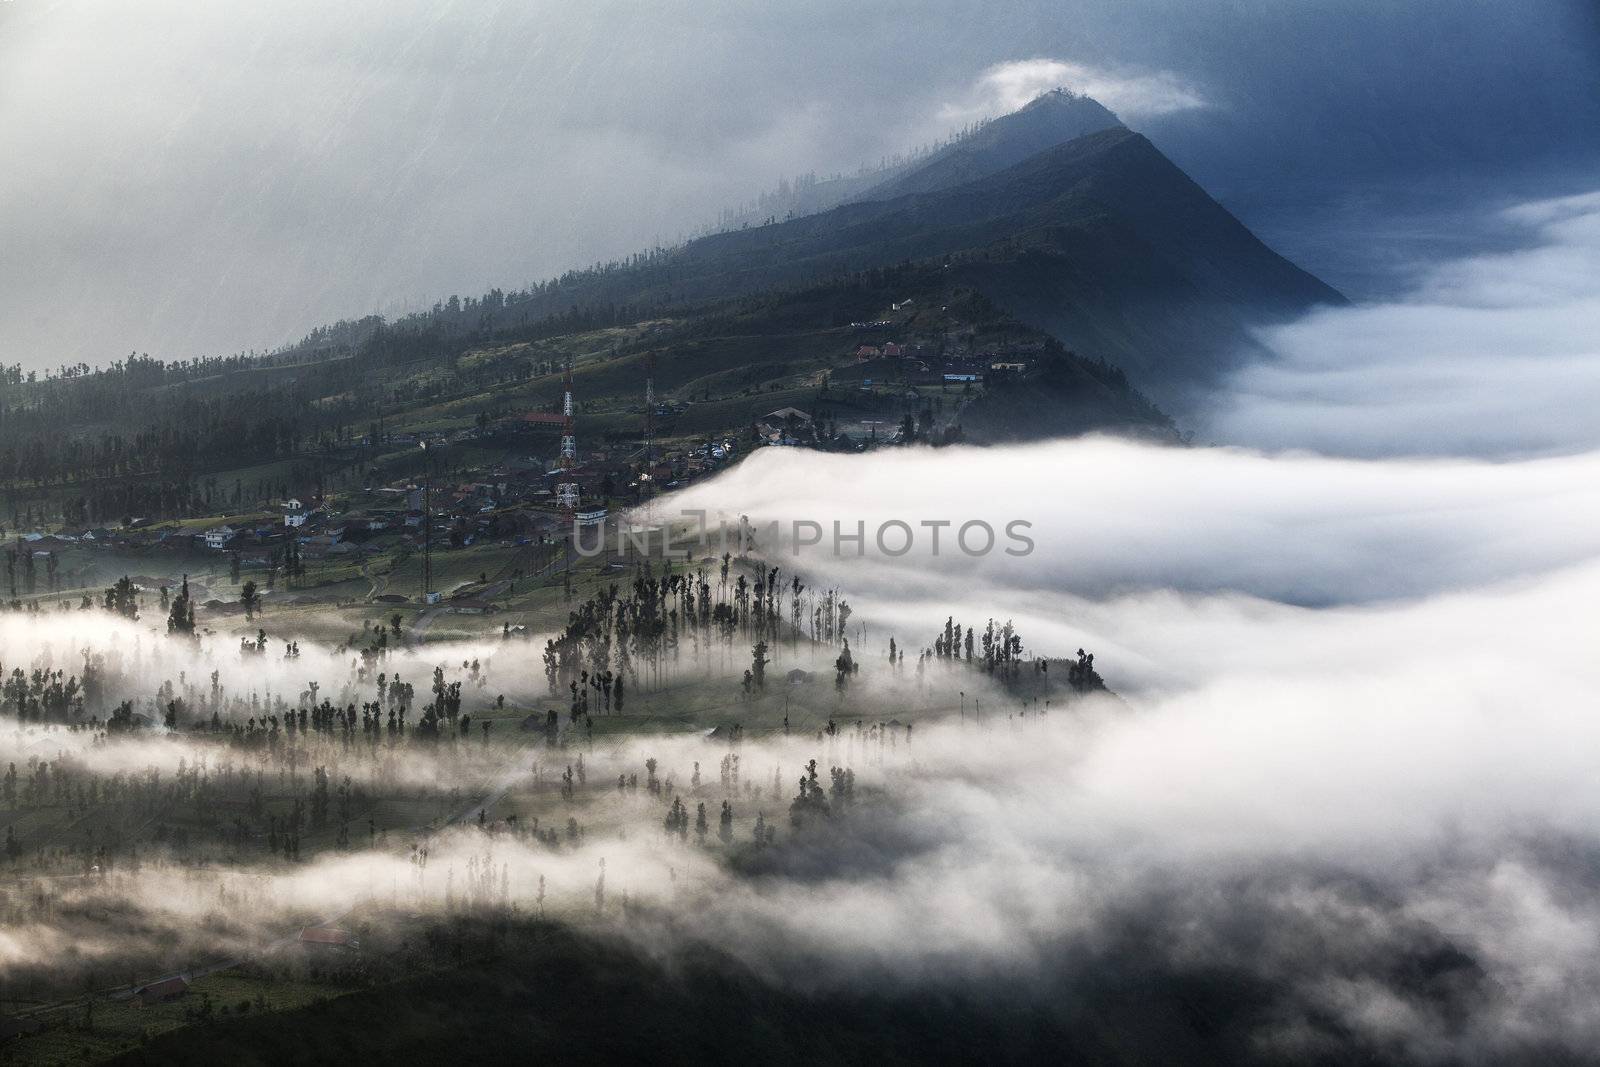 The mist at Cemoro Lawang Village Bromo Indonesia